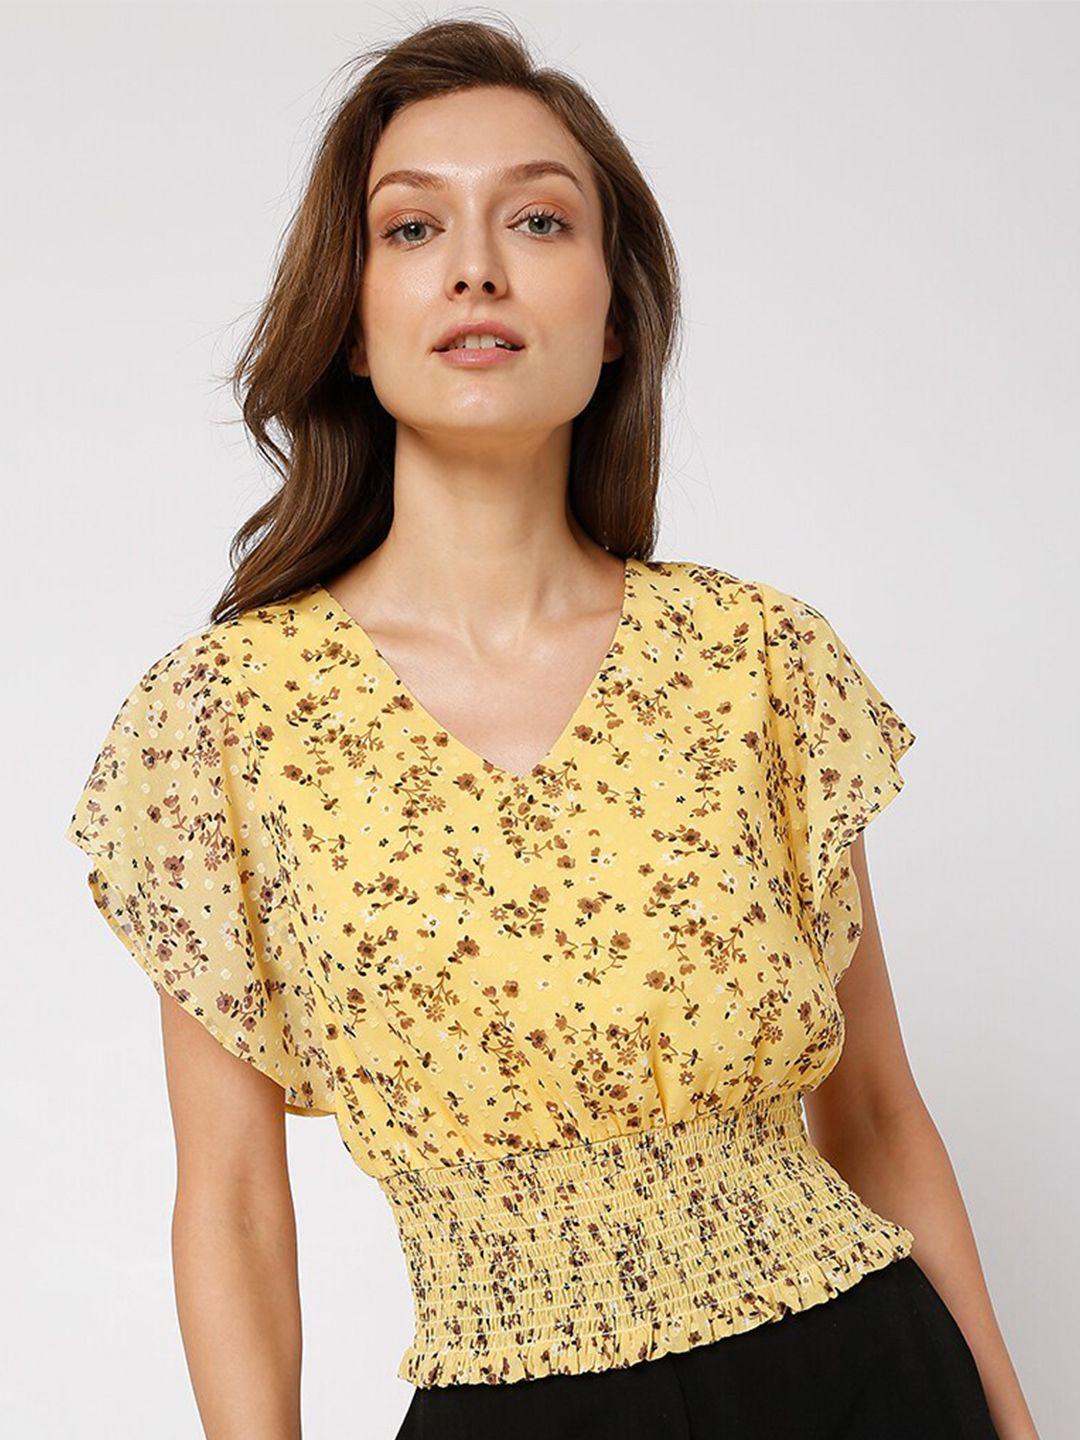 vero-moda-women-gold-toned-&-brown-floral-print-cinched-waist-top